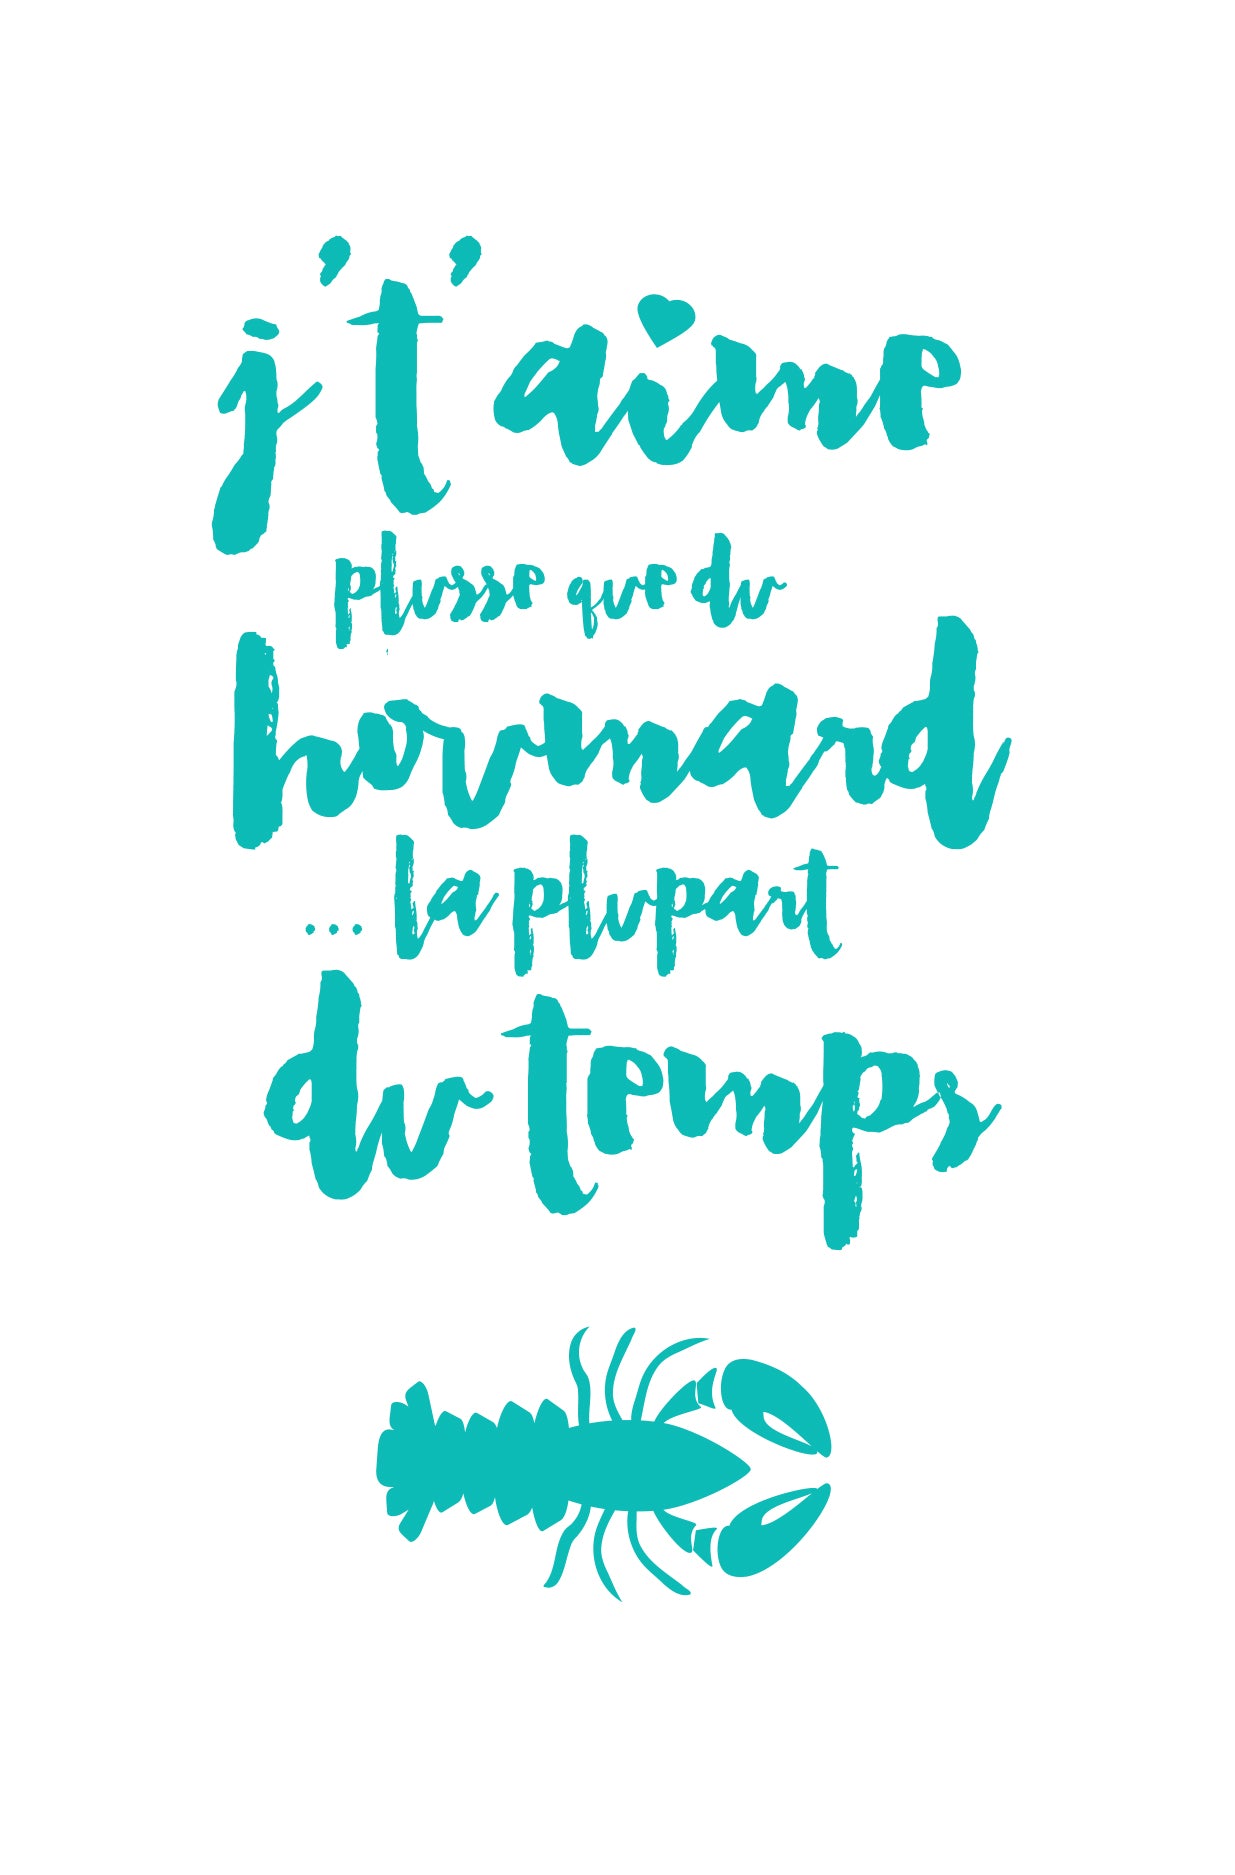 An Acadian saying about lobster.